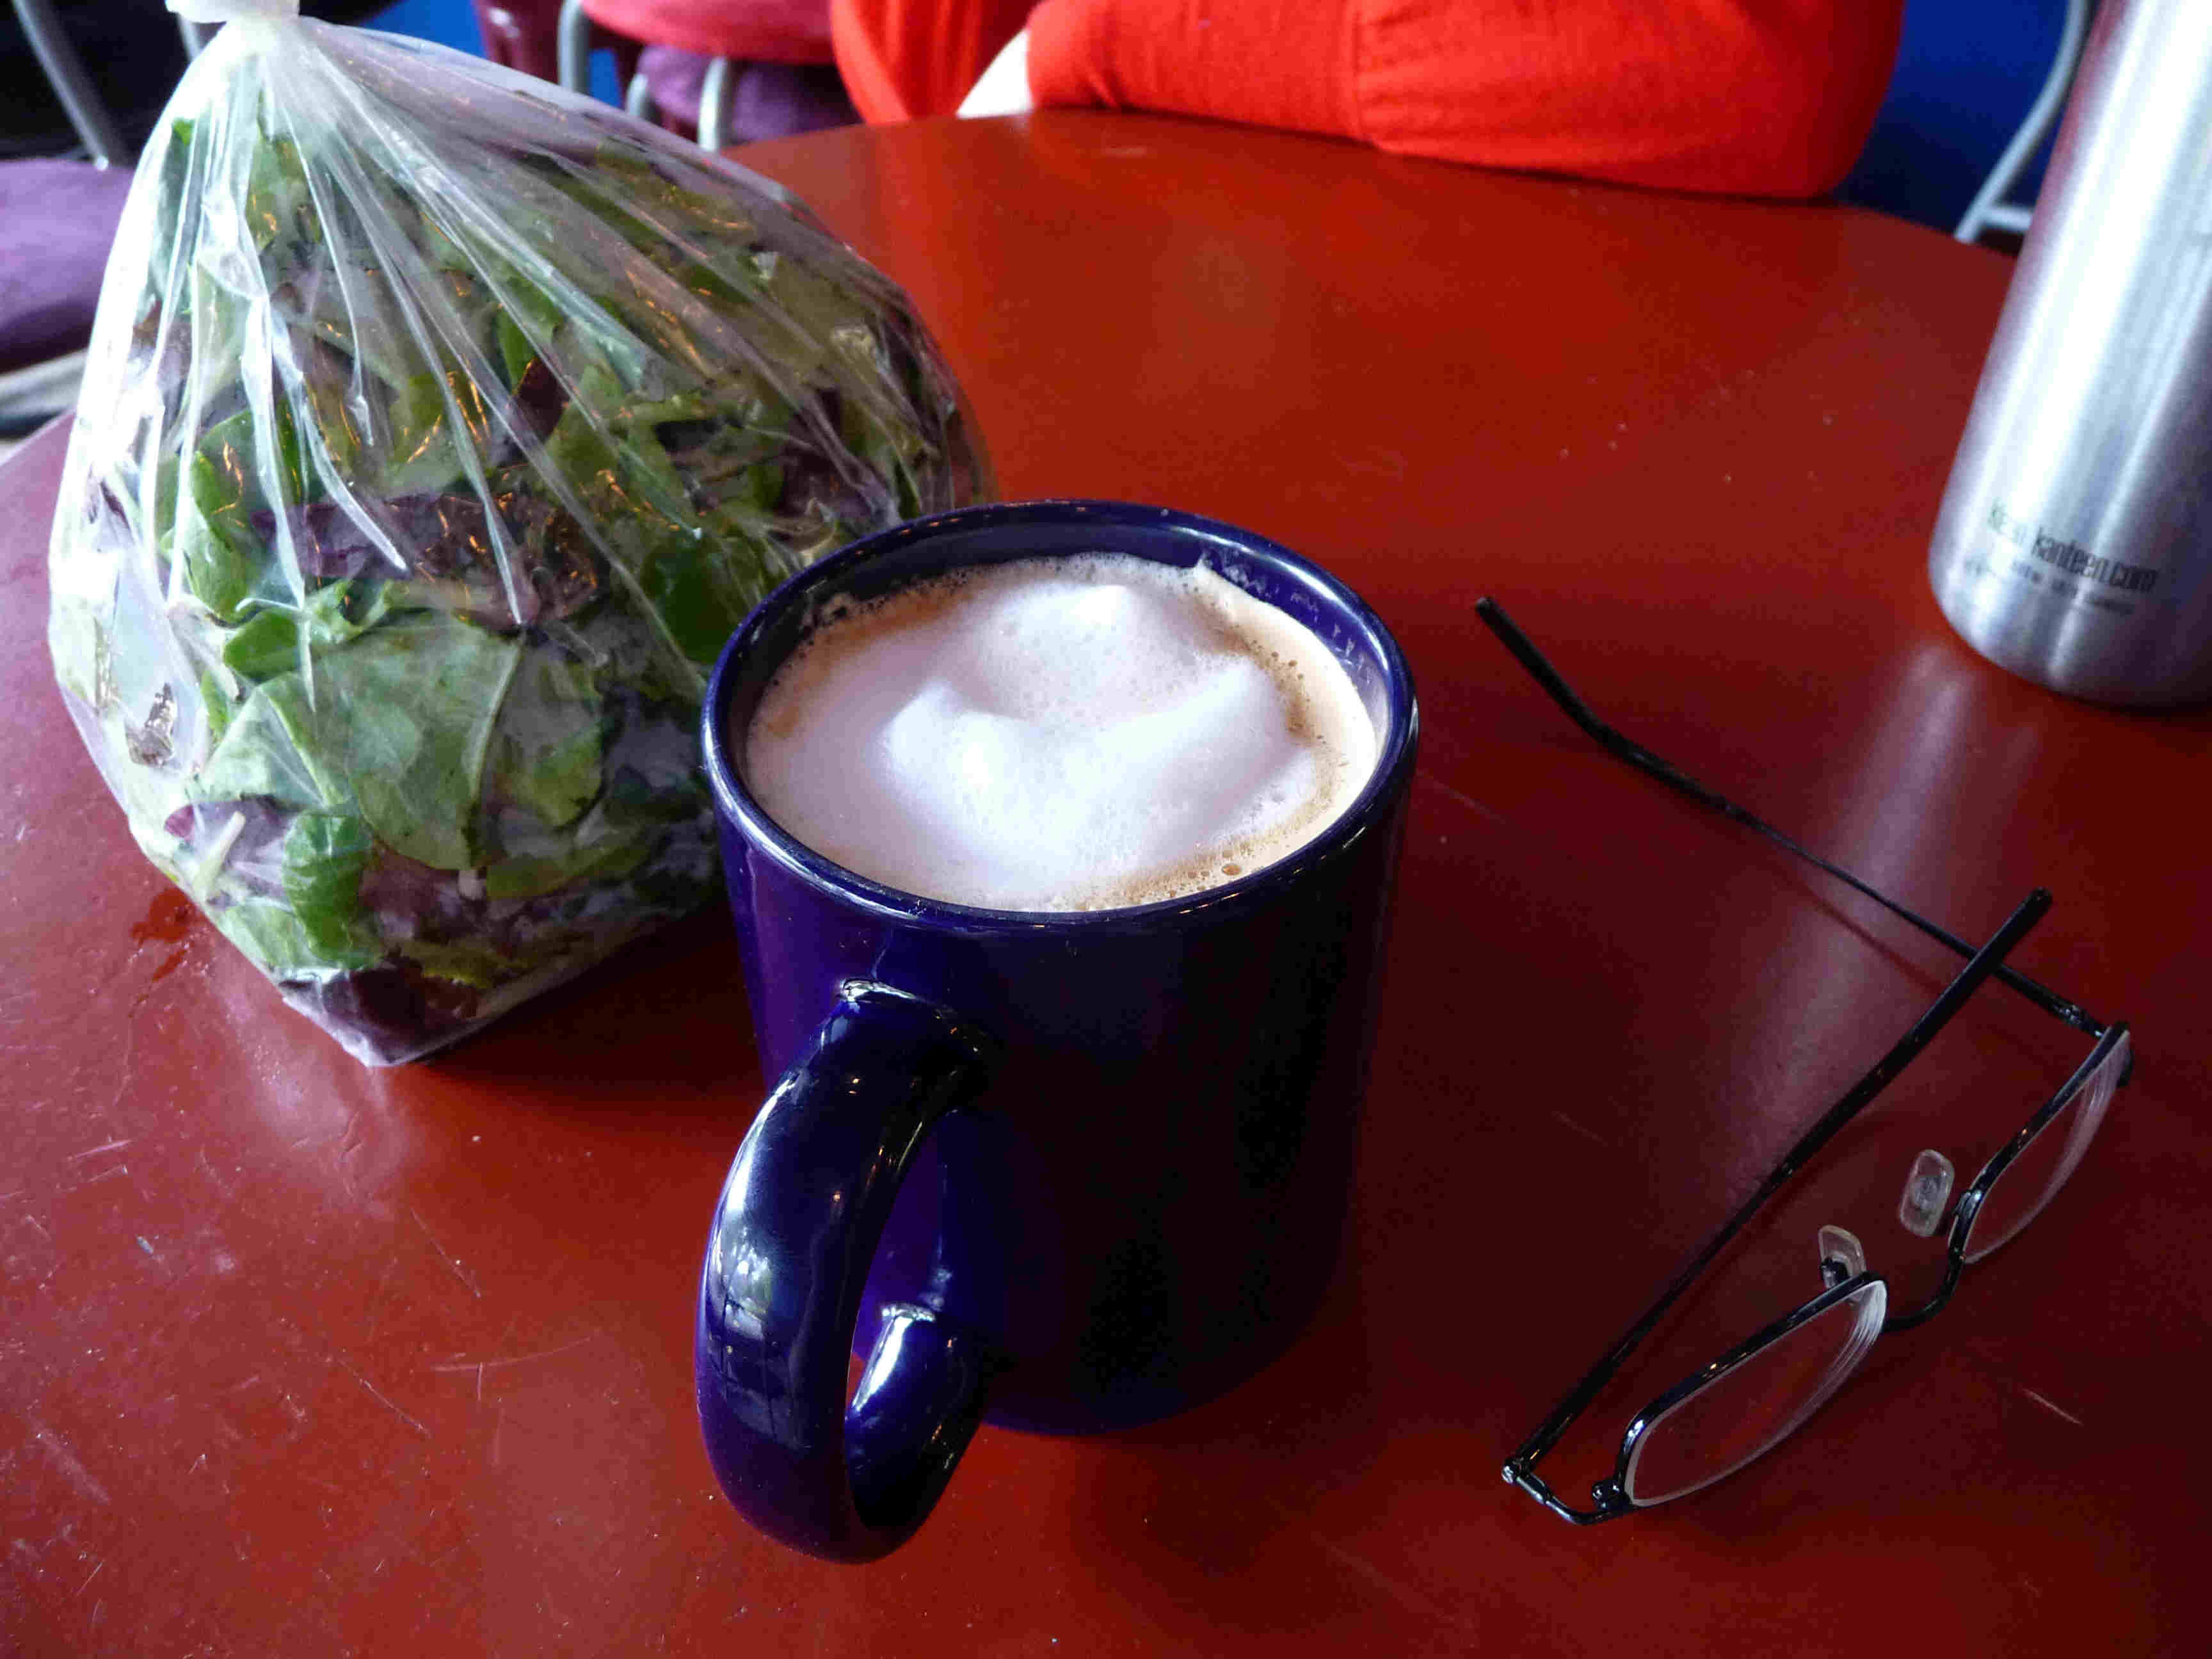 A cappuccino next to some mixed greens.